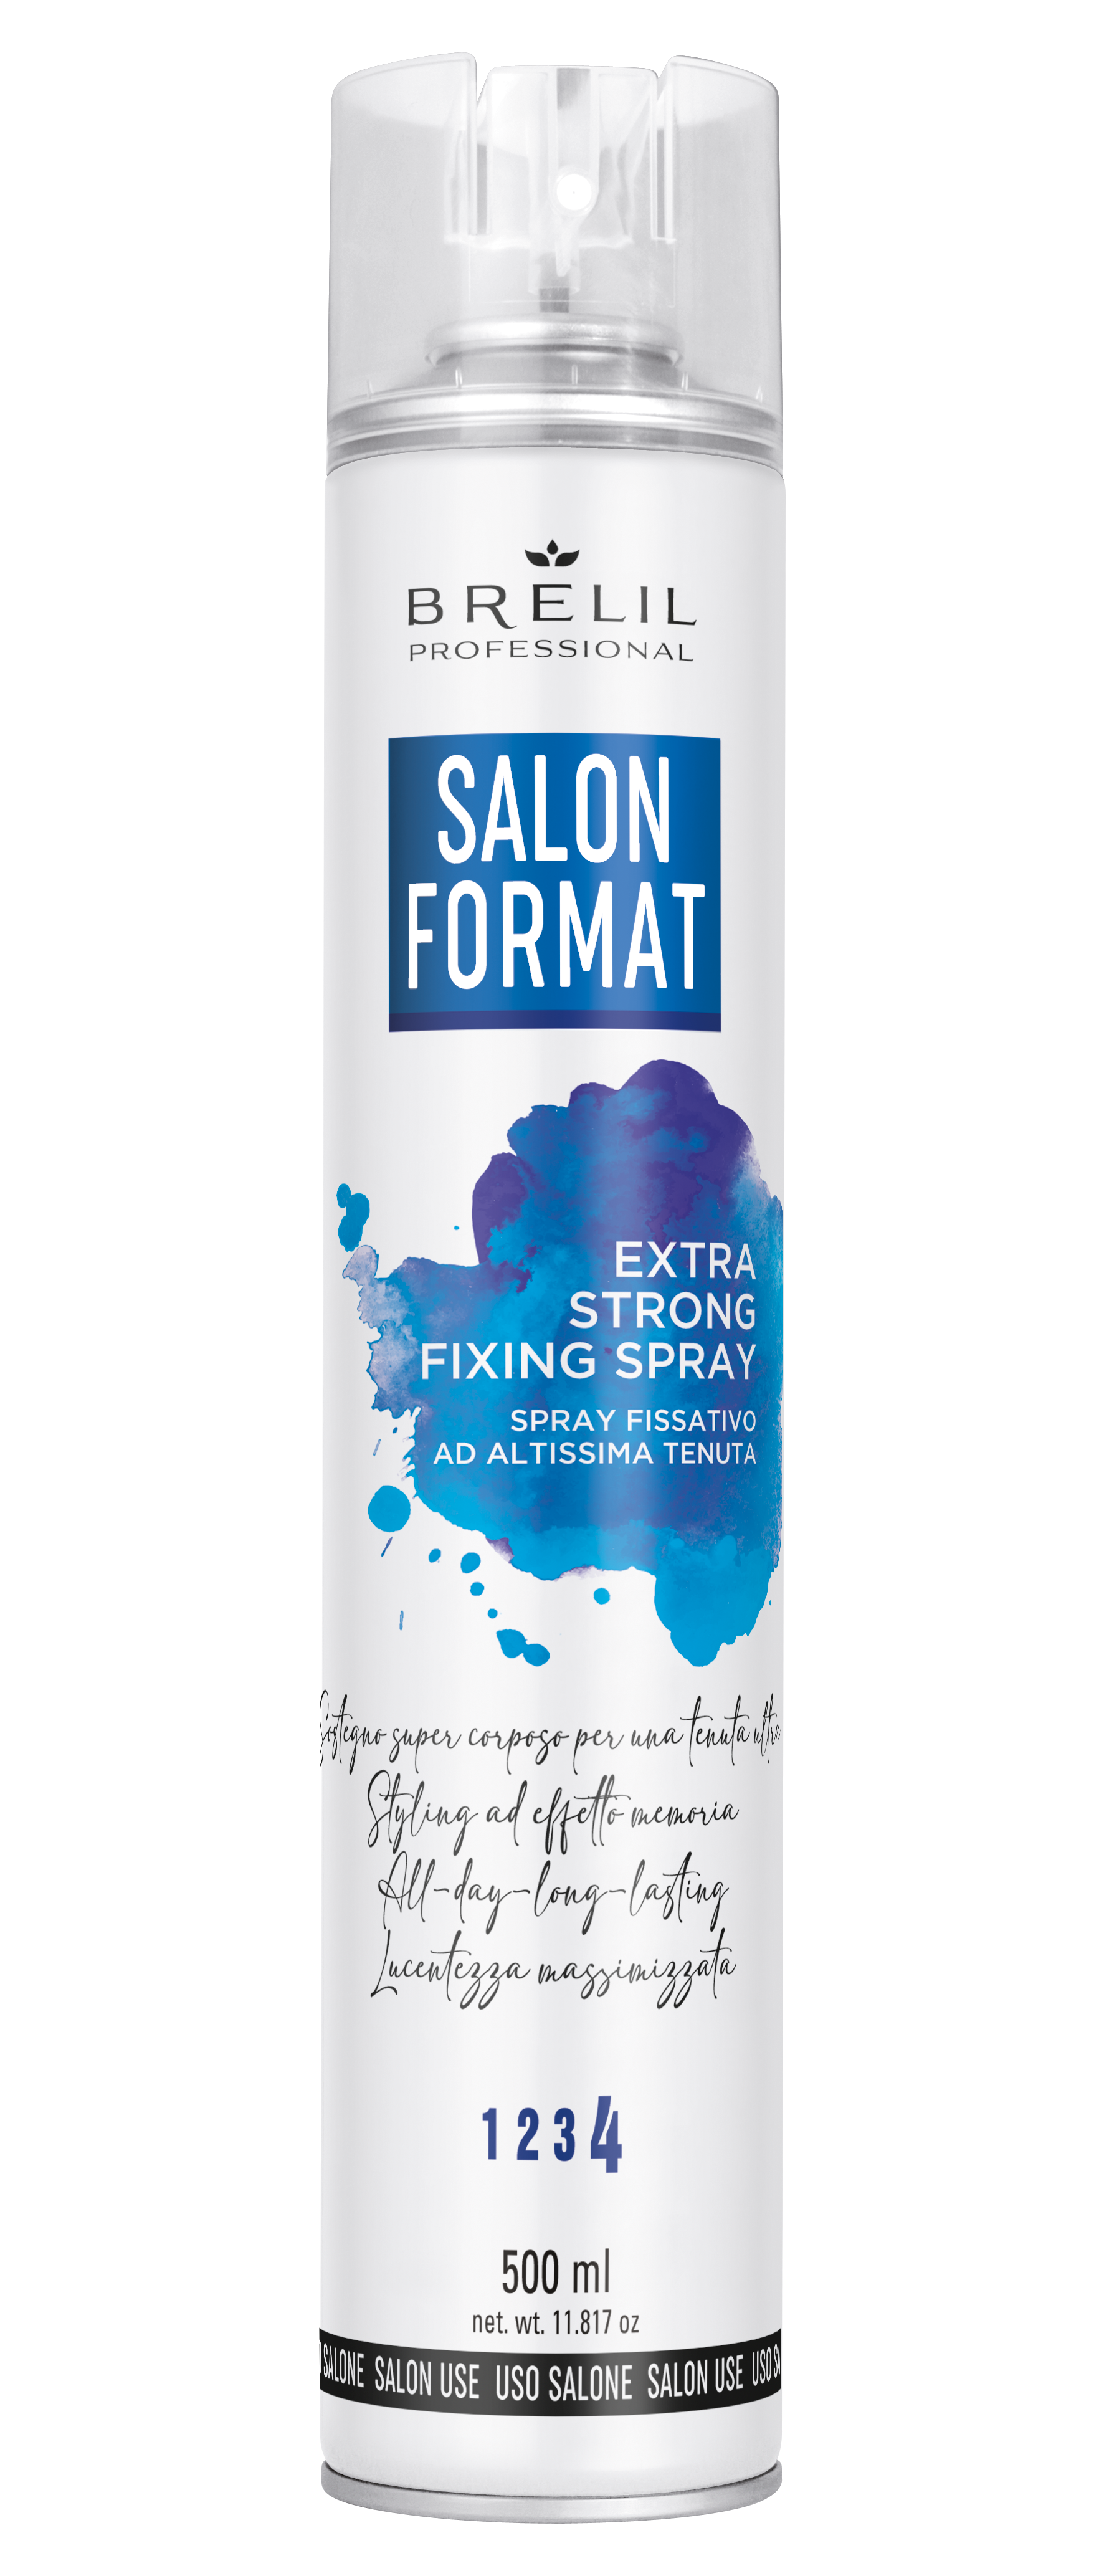 Salon Format Extra Strong Fixing